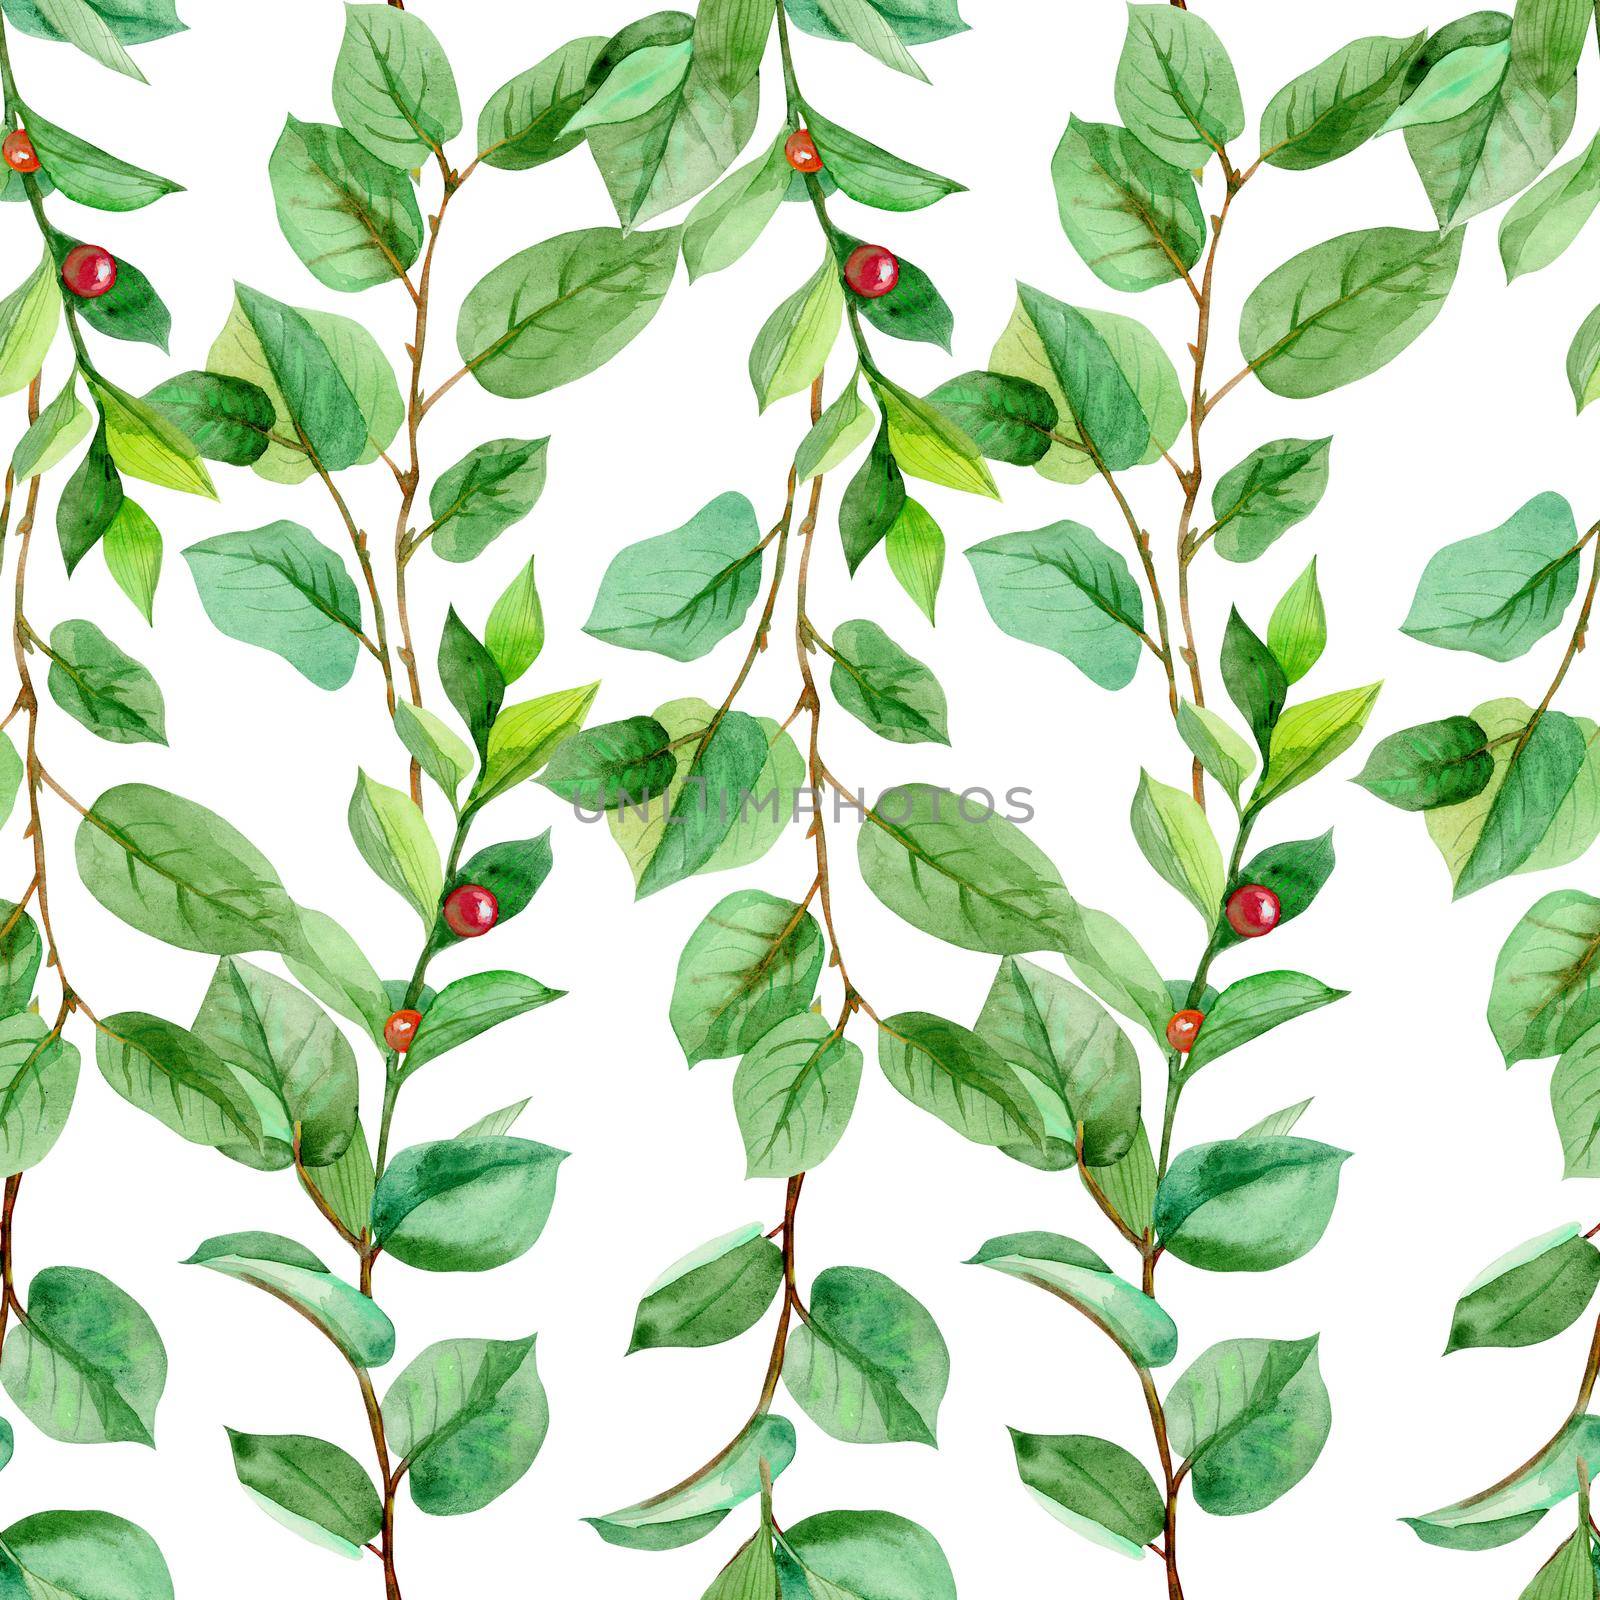 Floral leaves seamless pattern green color on a white background. Artistic design for floral print for packaging, textile, wallpaper, gift wrap, greeting or wedding background.